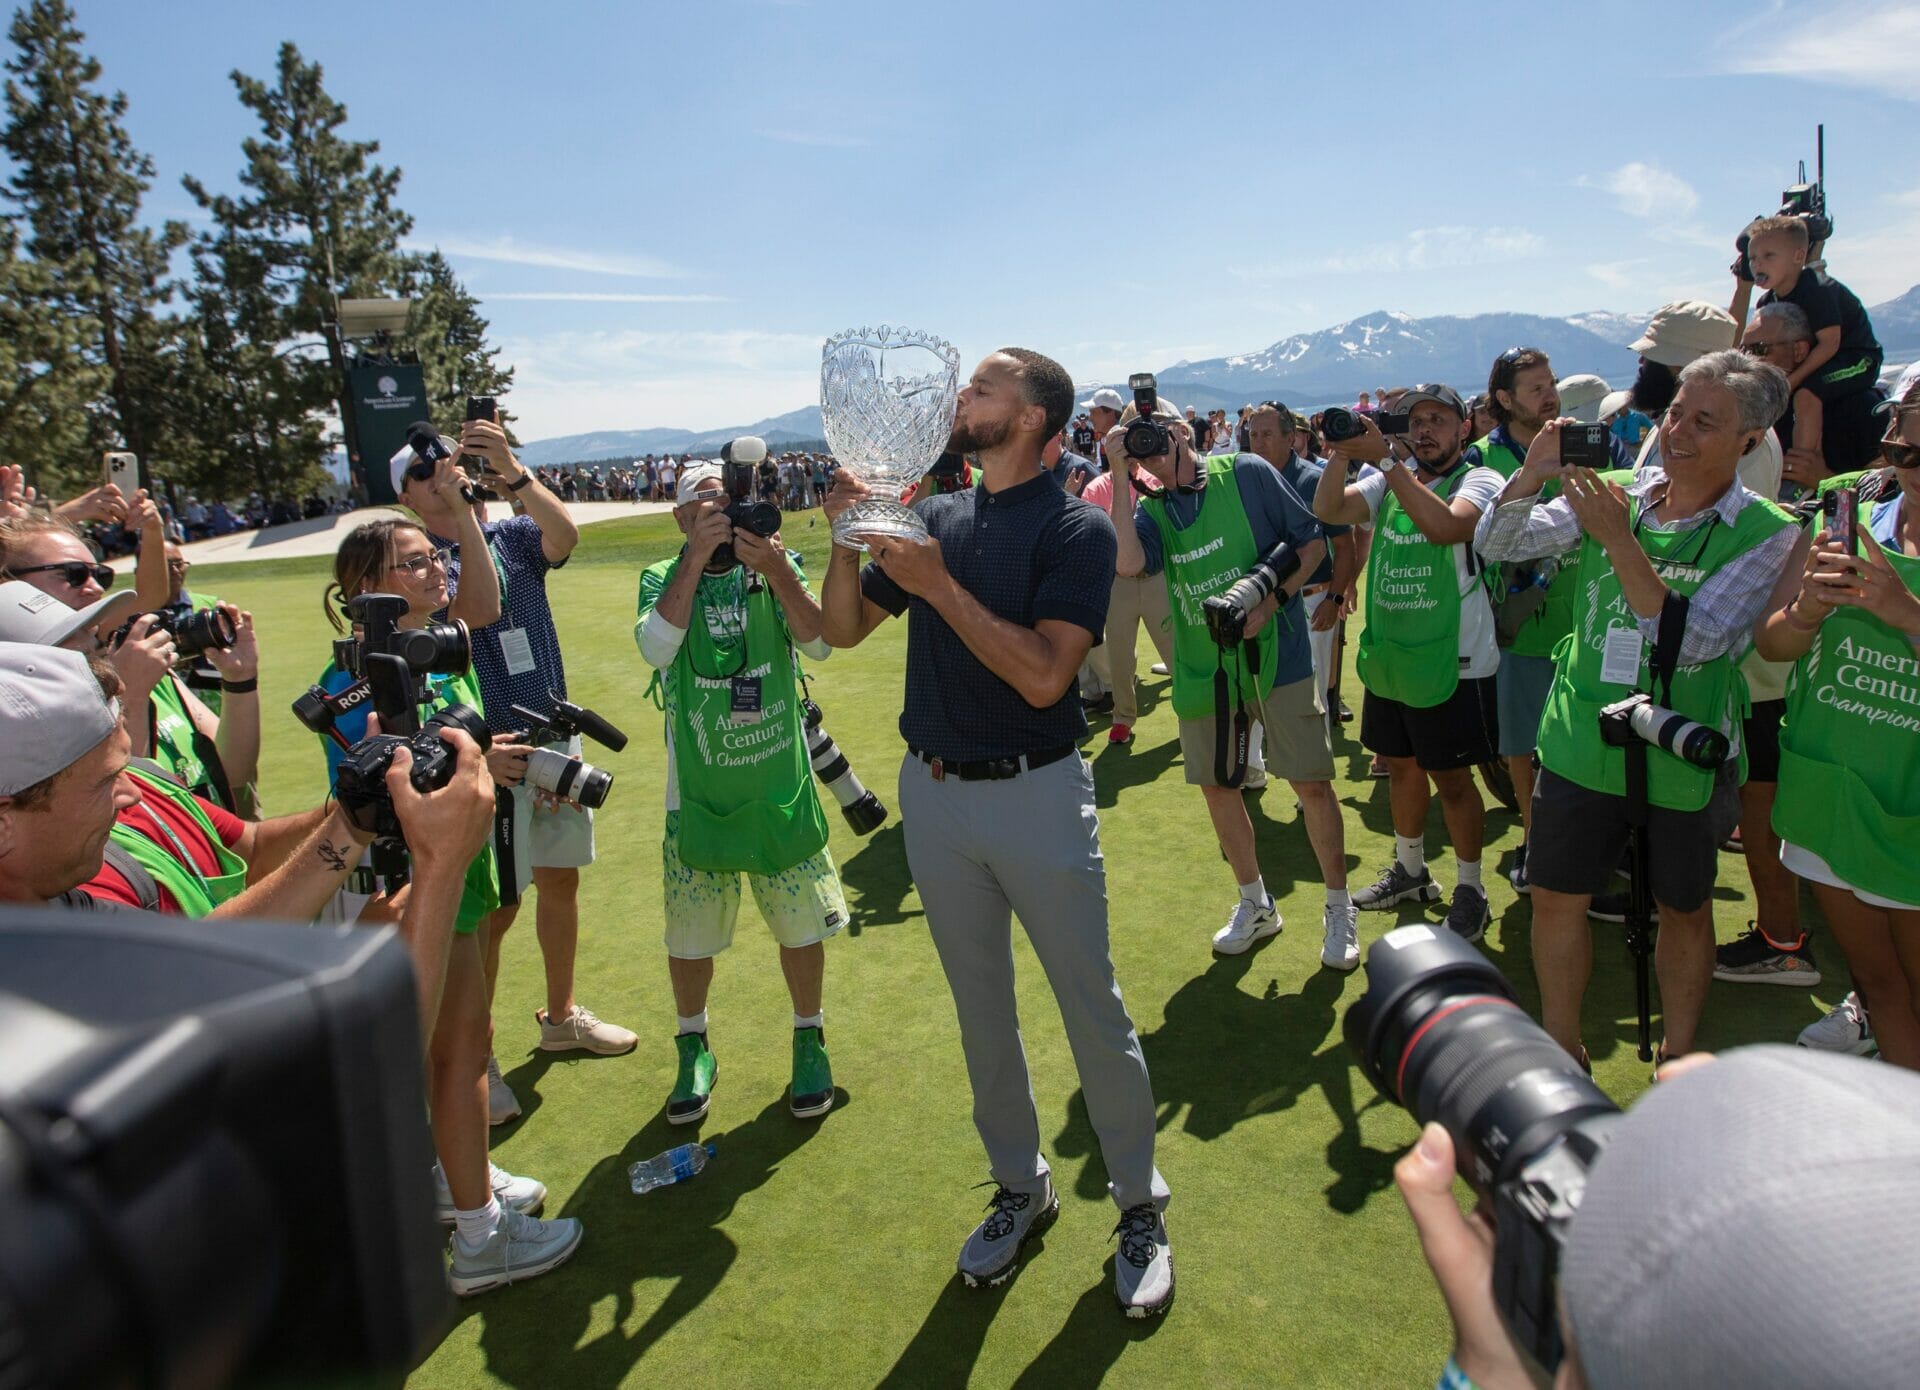 Stephen Curry celebrates kissing the trophy after sinking the winning putt during the final round of the American Century Celebrity Championship golf tournament at Edgewood Tahoe Golf Course in Stateline, Nev., Sunday, July 16, 2023. (NBA News)